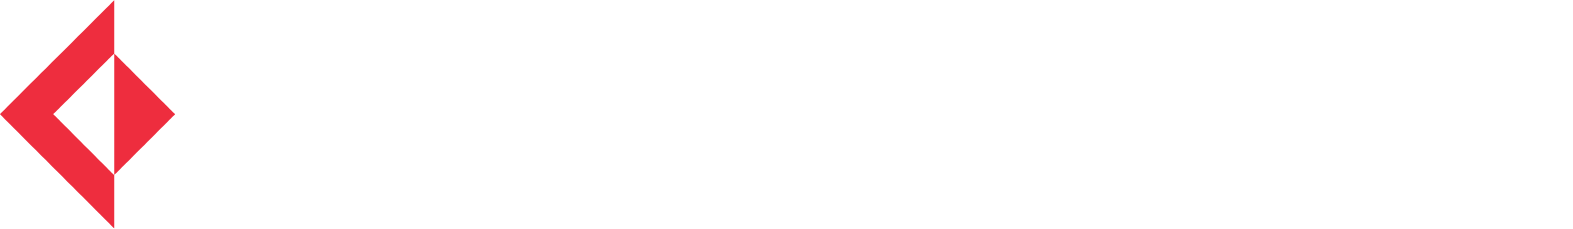 Cosmo First logo large for dark backgrounds (transparent PNG)